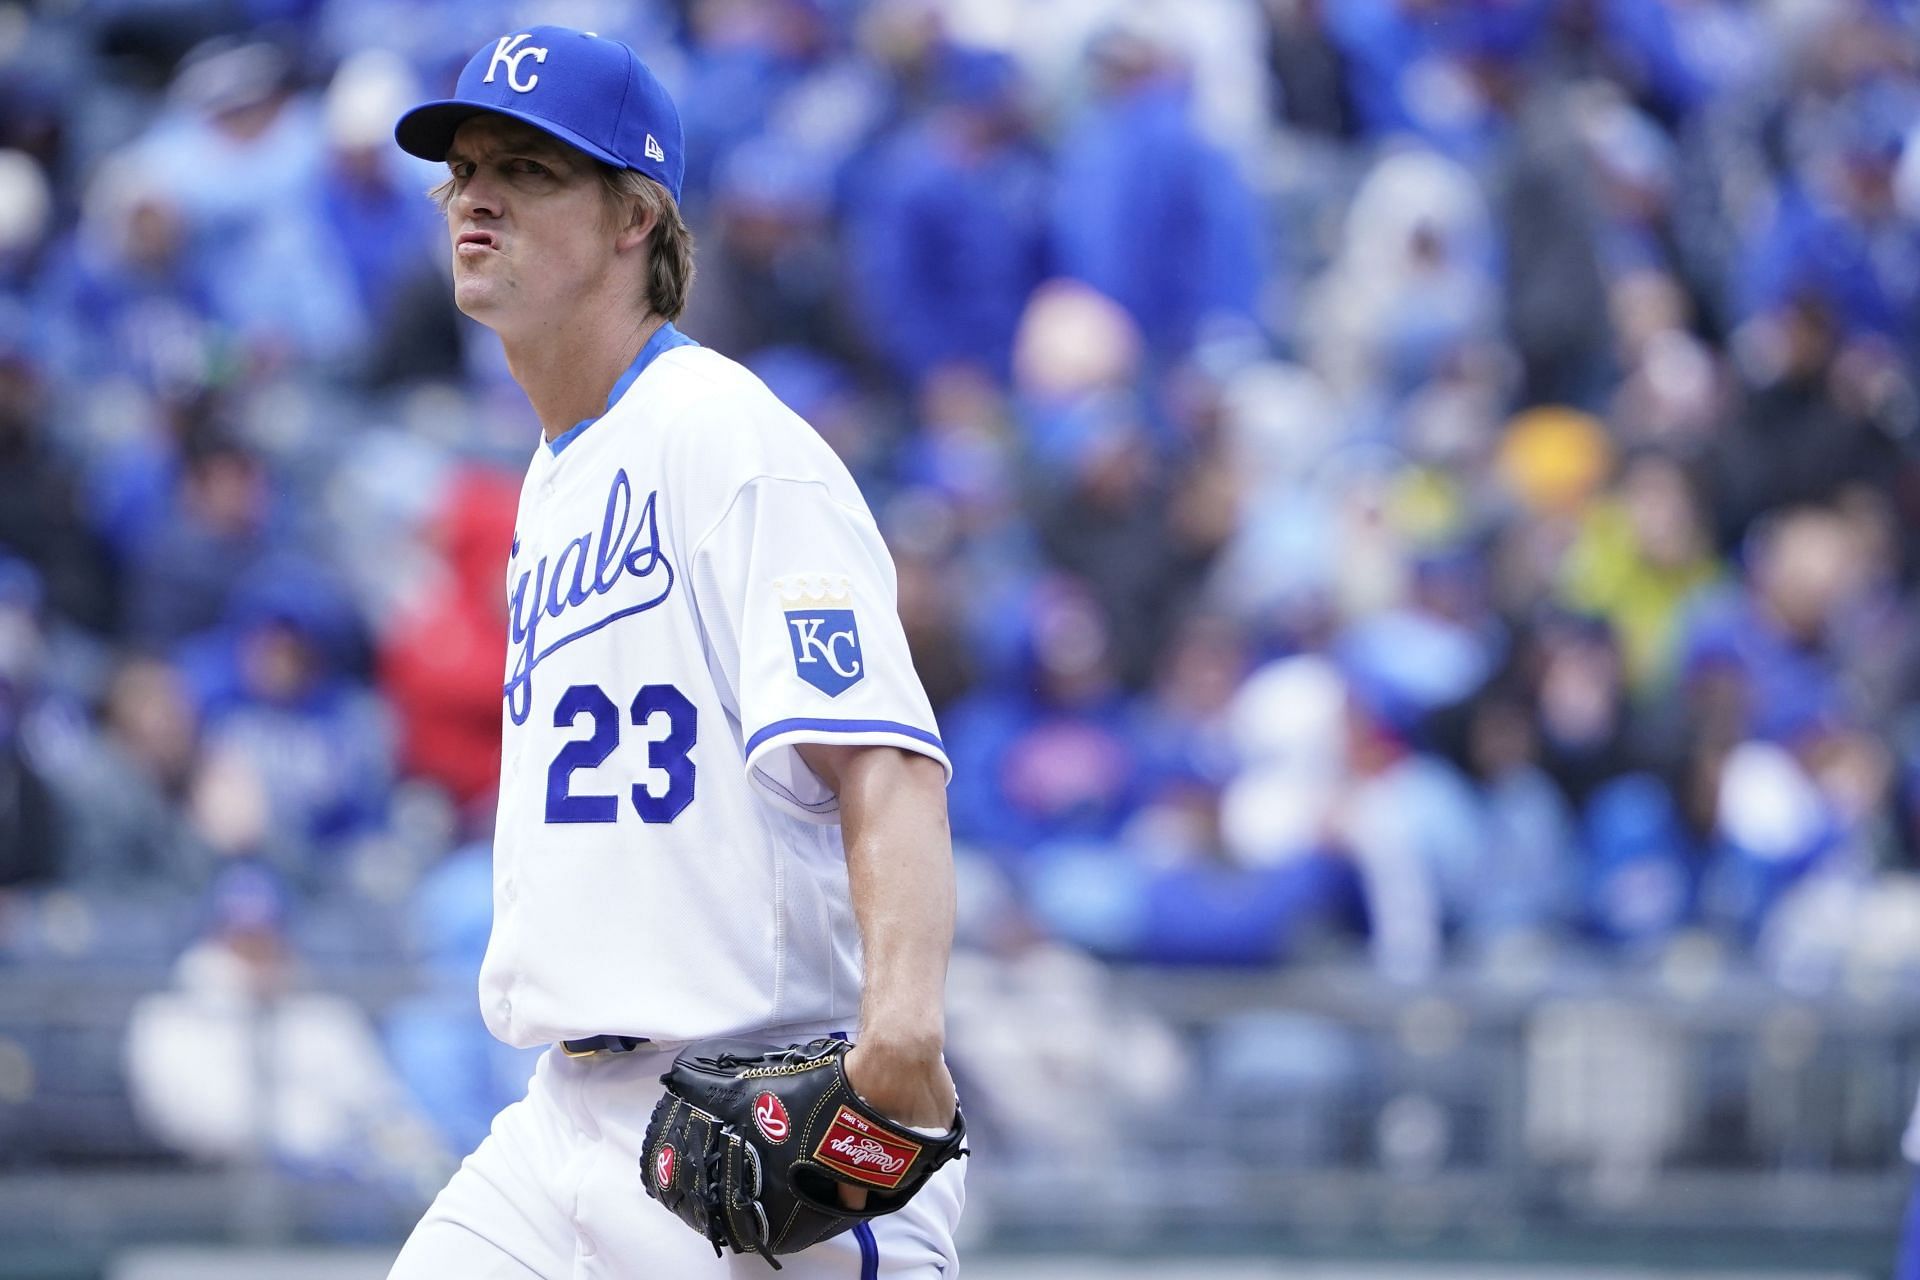 Zack Greinke facing A's in spring training debut Friday